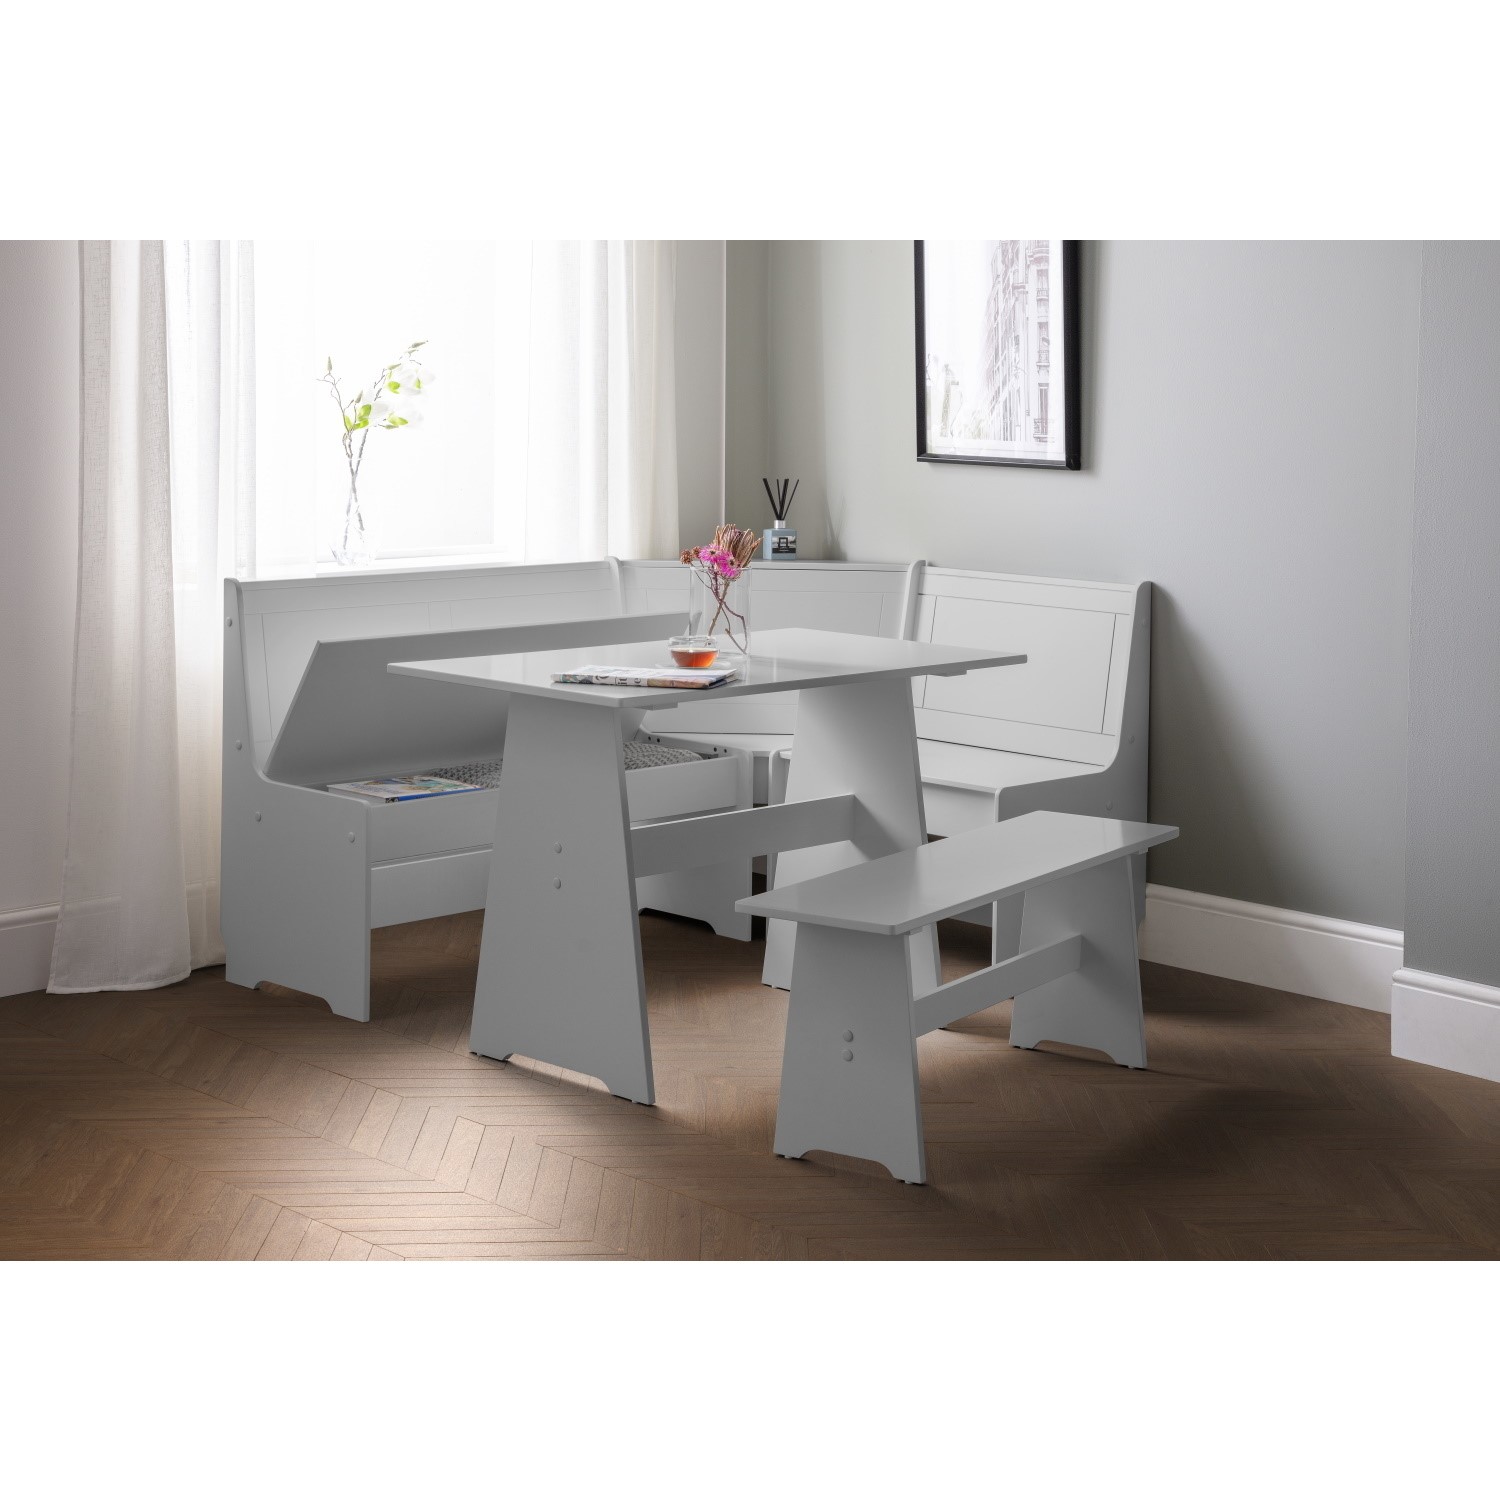 Photo of Light grey wooden corner dining set with a bench - seats 5 - newport